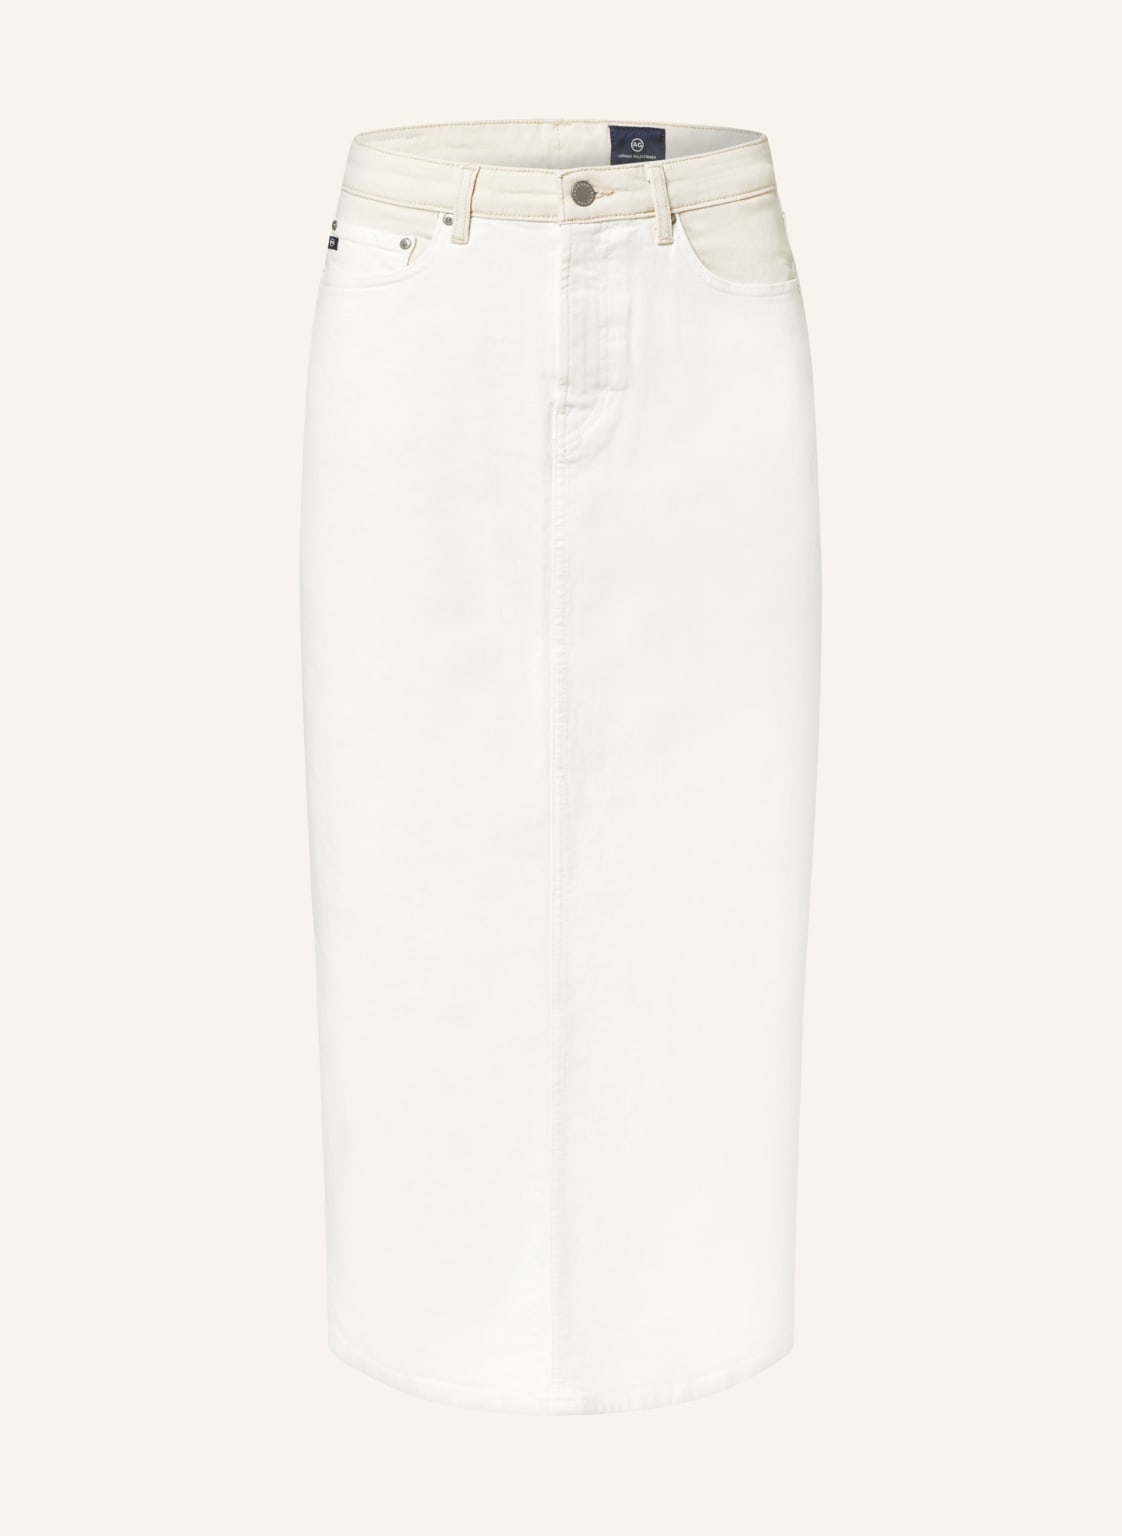 Ag Jeans Jeansrock Skirt Long Two Tone weiss von ag jeans